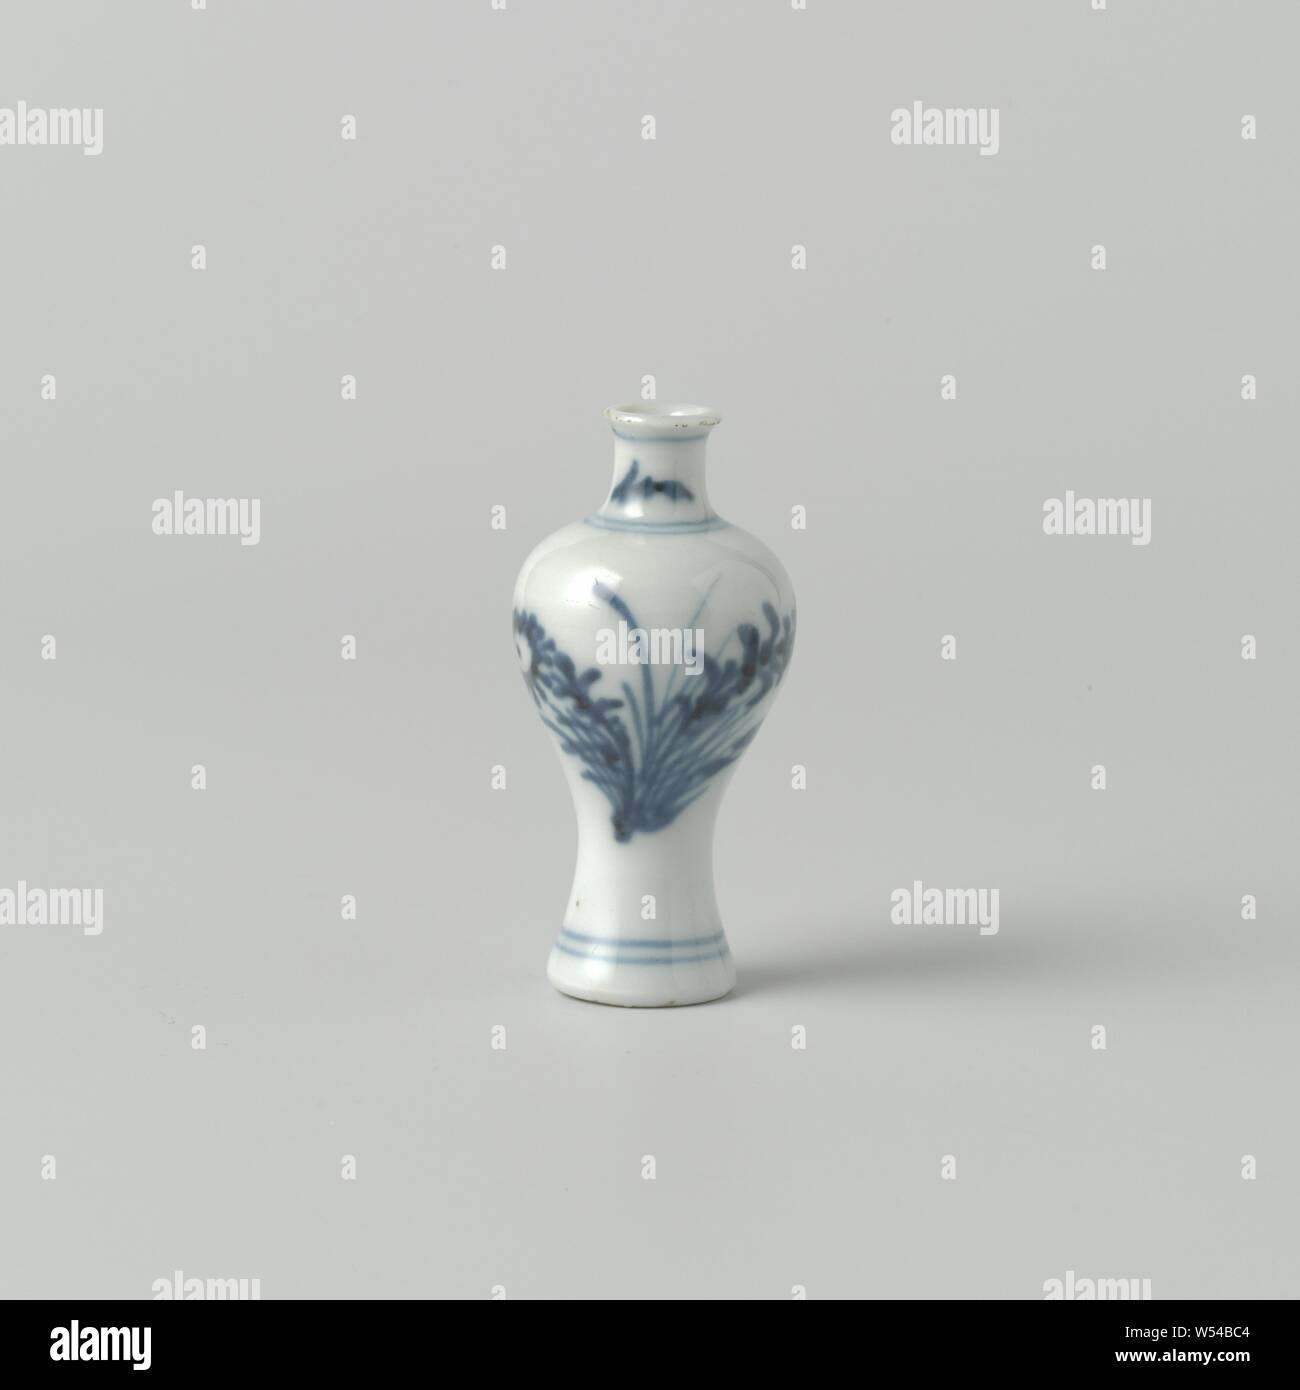 Miniature baluster vase with flower sprays, Miniature baluster-shaped vase of porcelain, painted in underglaze blue. On the belly a flower branch (aster) and a small, loose branch. Two twigs on the neck. Blue White., anonymous, China, c. 1675 - c. 1724, Qing-dynasty (1644-1912) / Kangxi-period (1662-1722) / Yongzheng-period (1723-1735), porcelain (material), glaze, cobalt (mineral), vitrification, h 6 cm Stock Photo